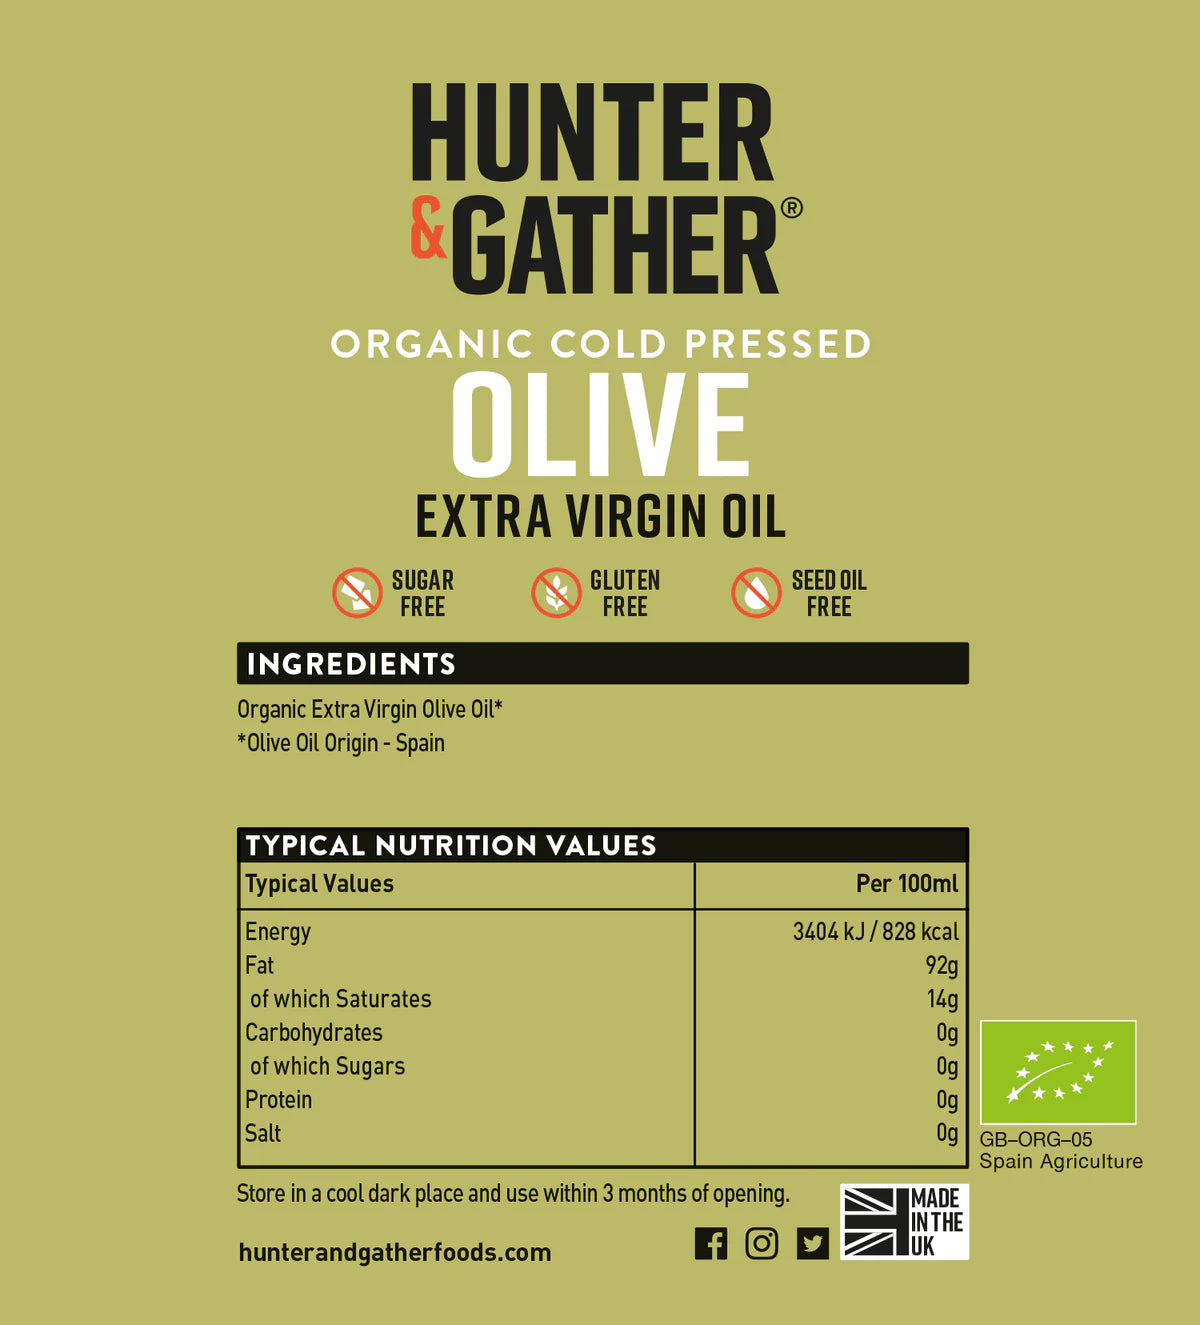 Cold Pressed, Organic & Extra Virgin Olive Oil -500ml